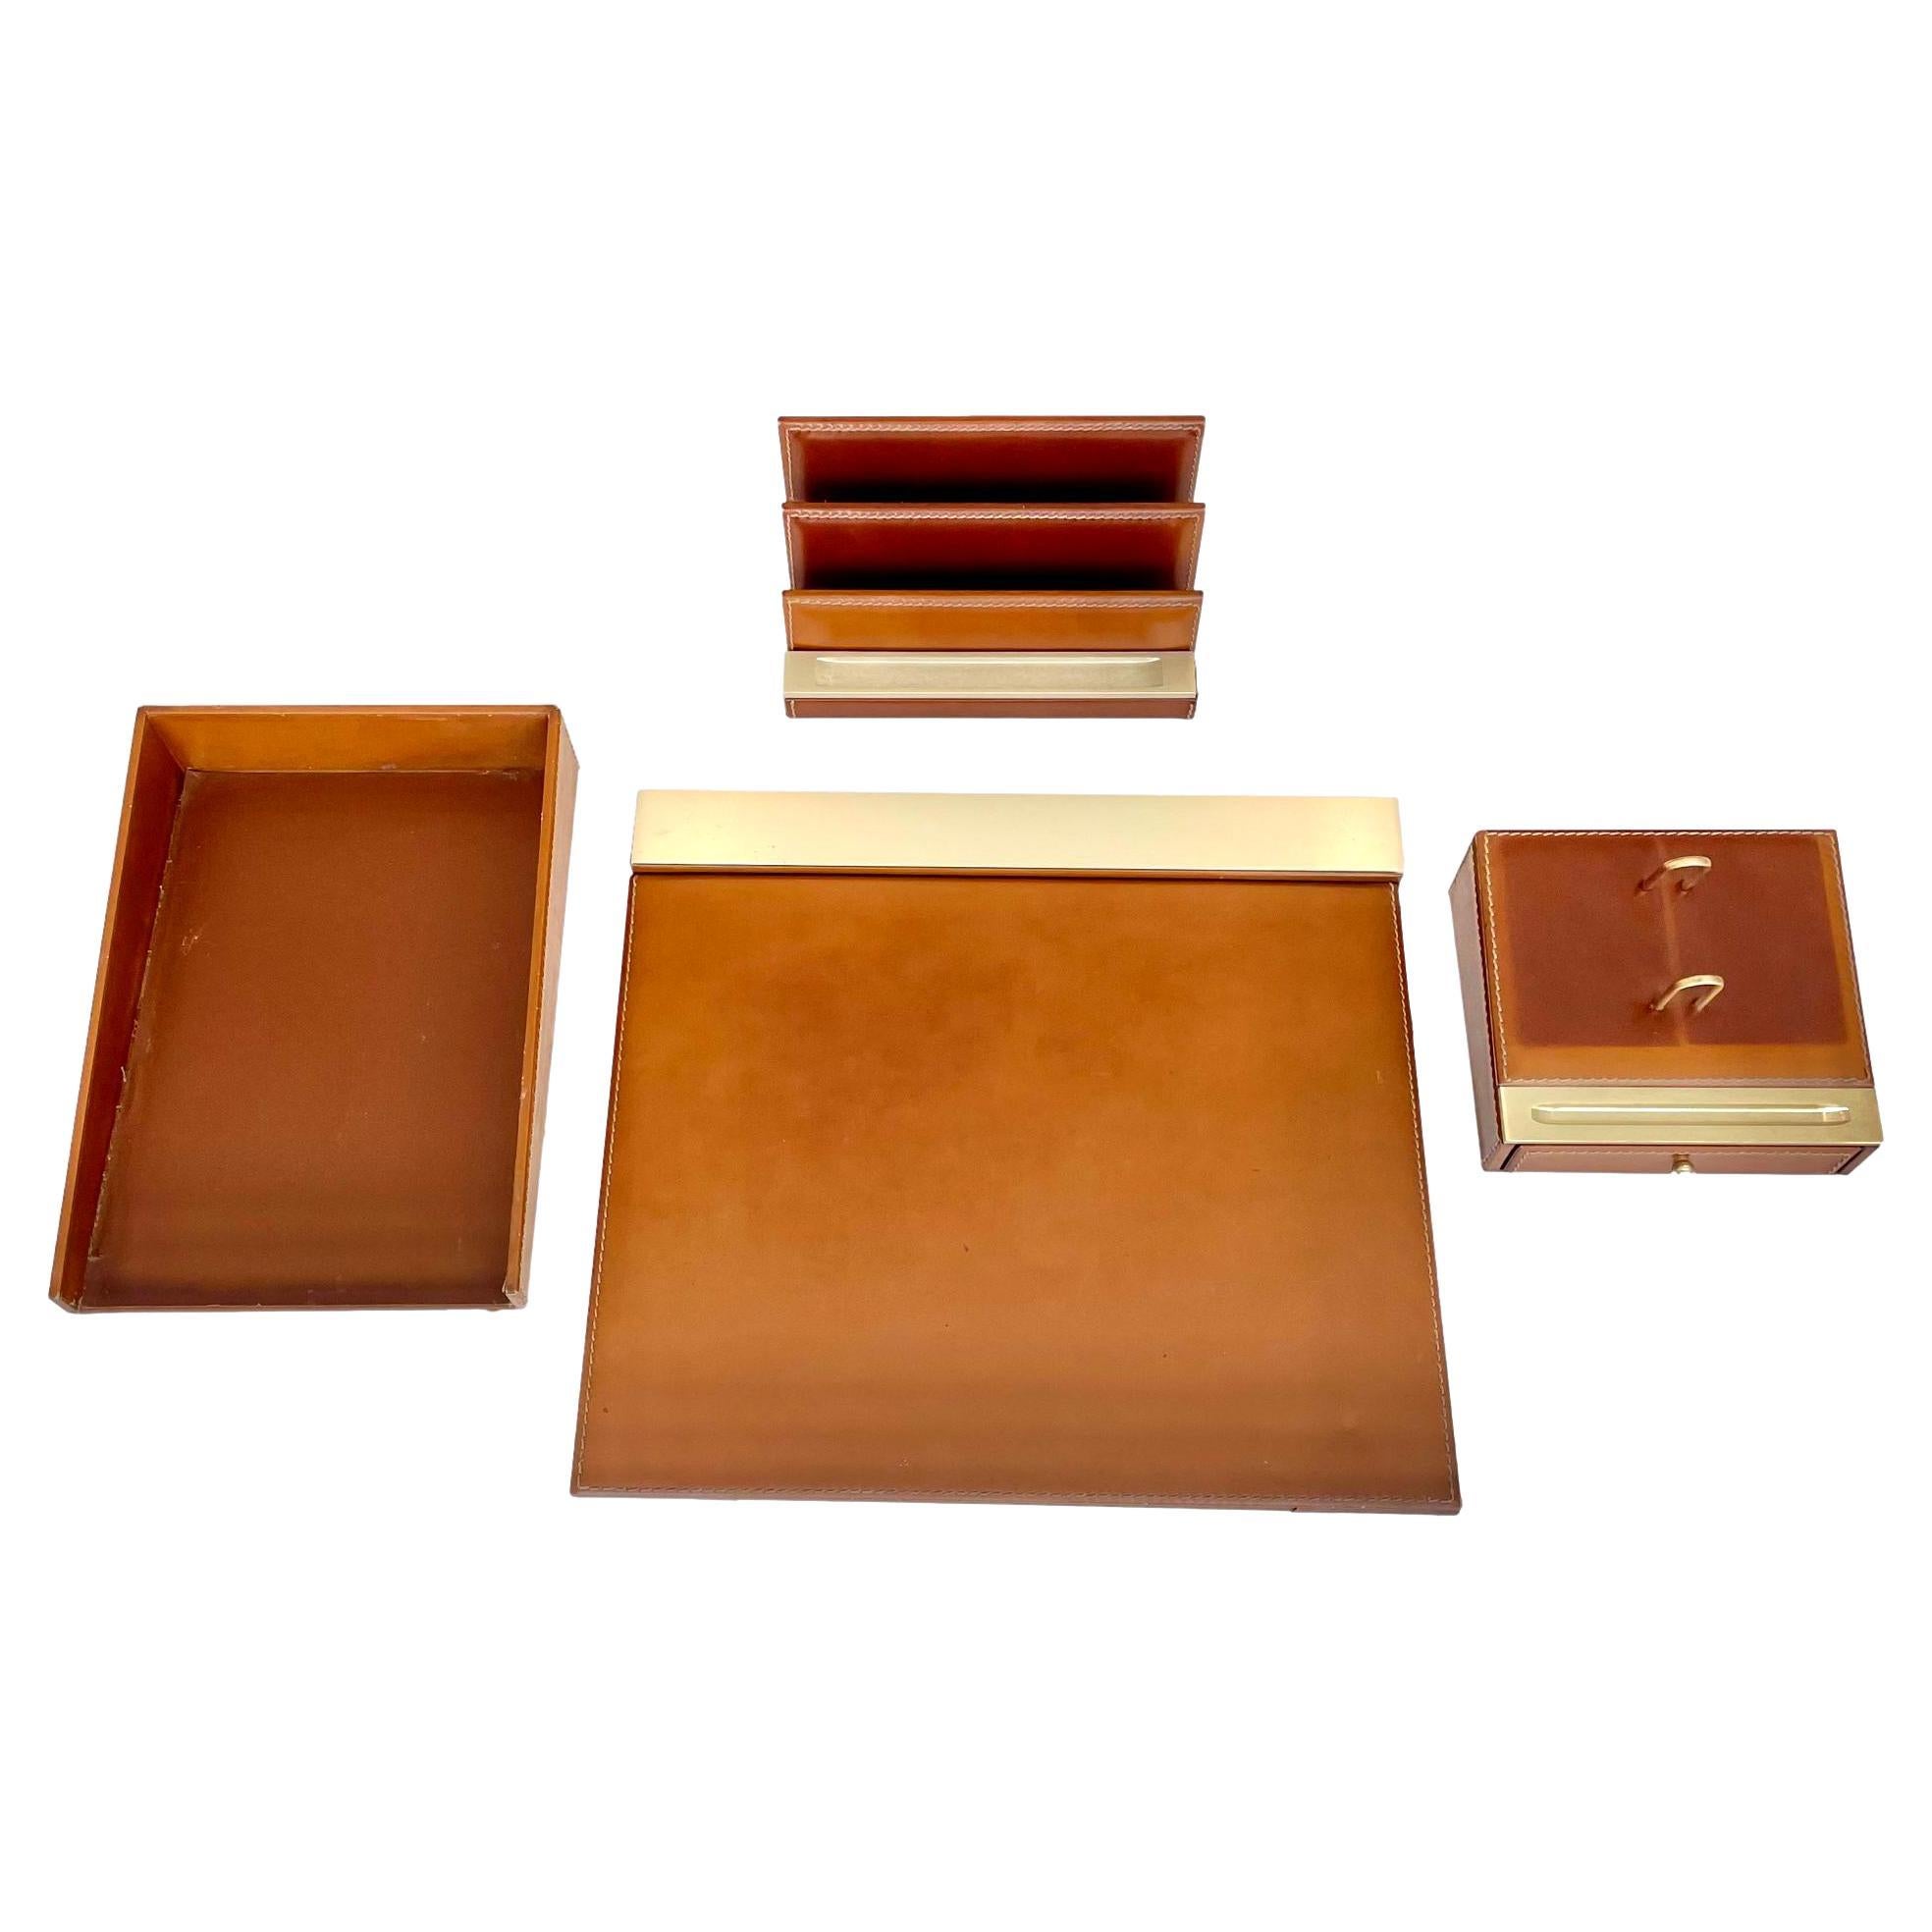 French Camel Leather Desk Set by Le Tanneur